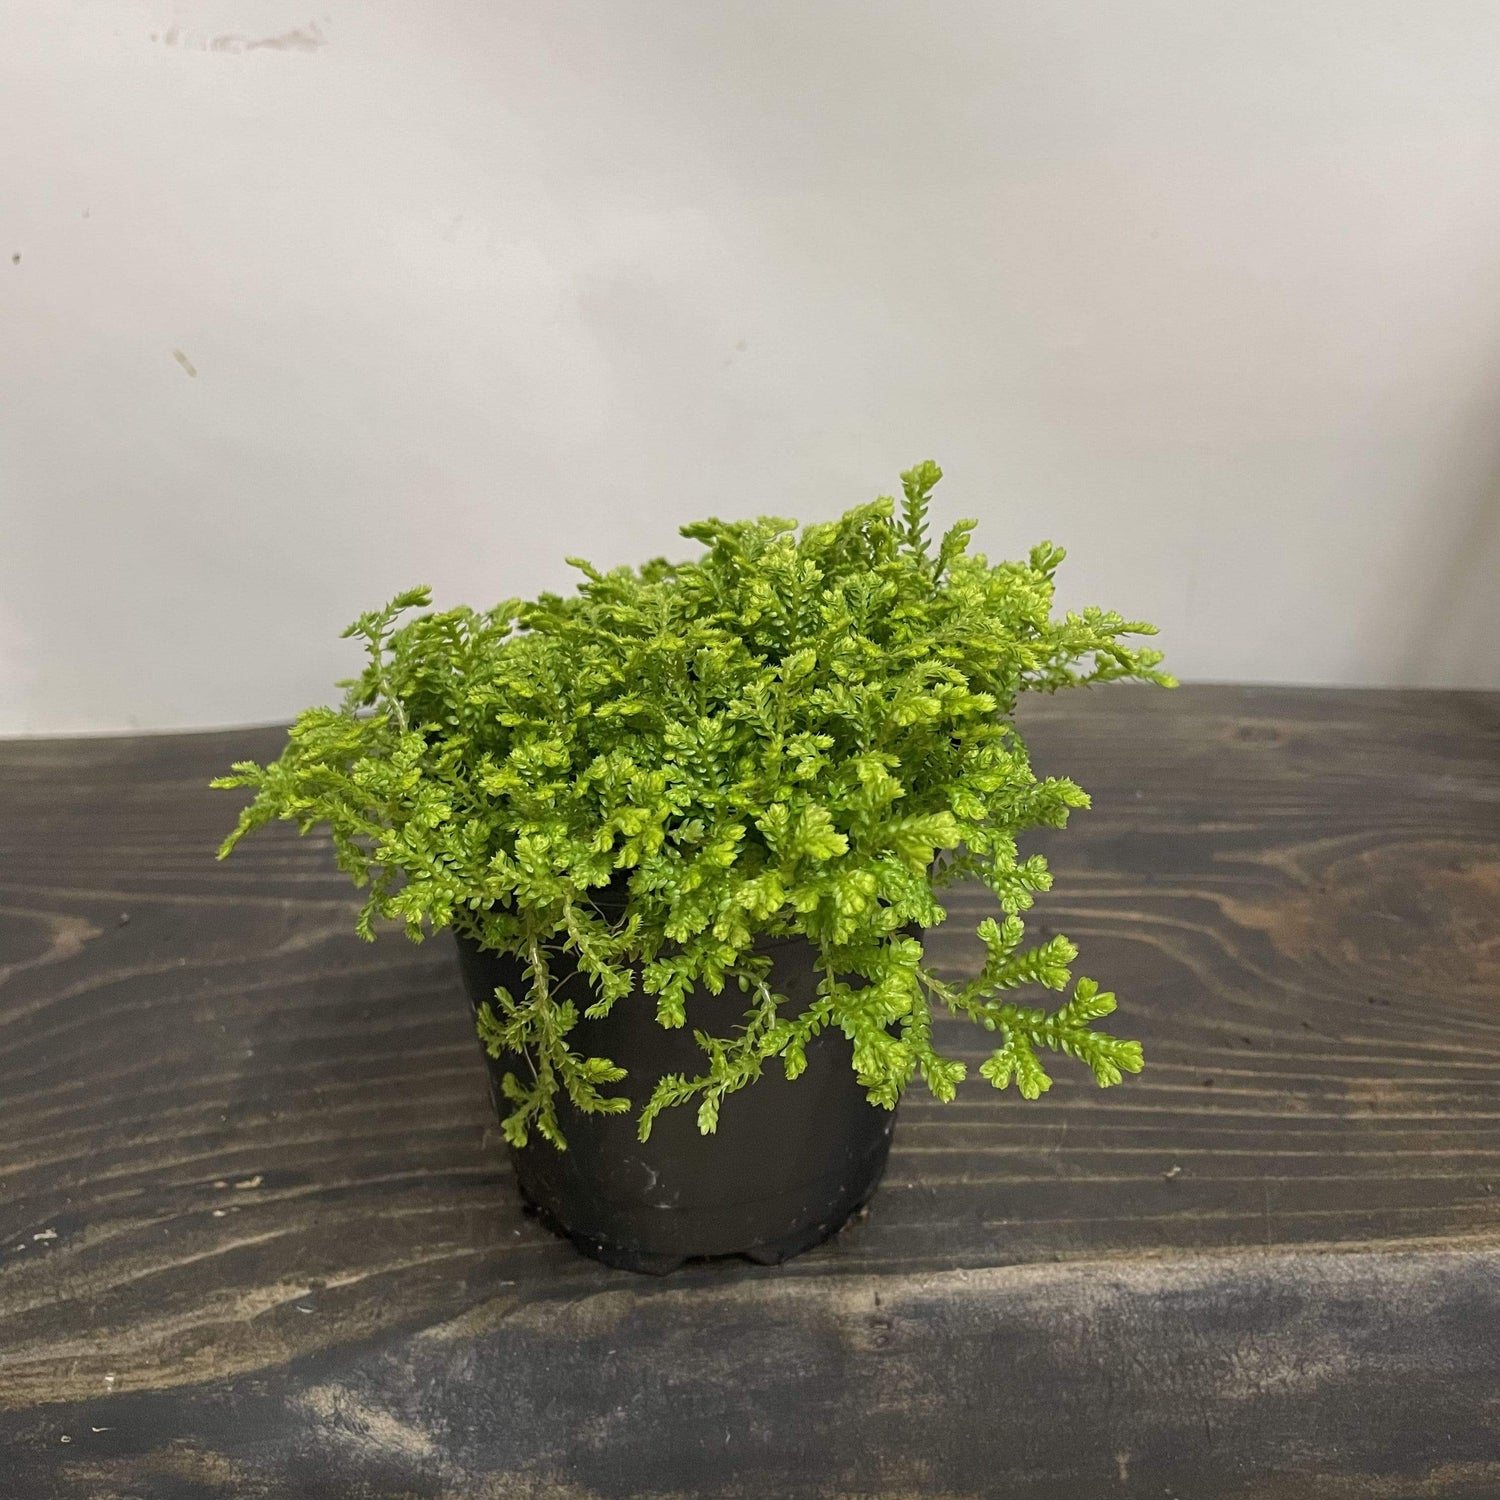 Club Moss 'Golden' - Urban Sprouts